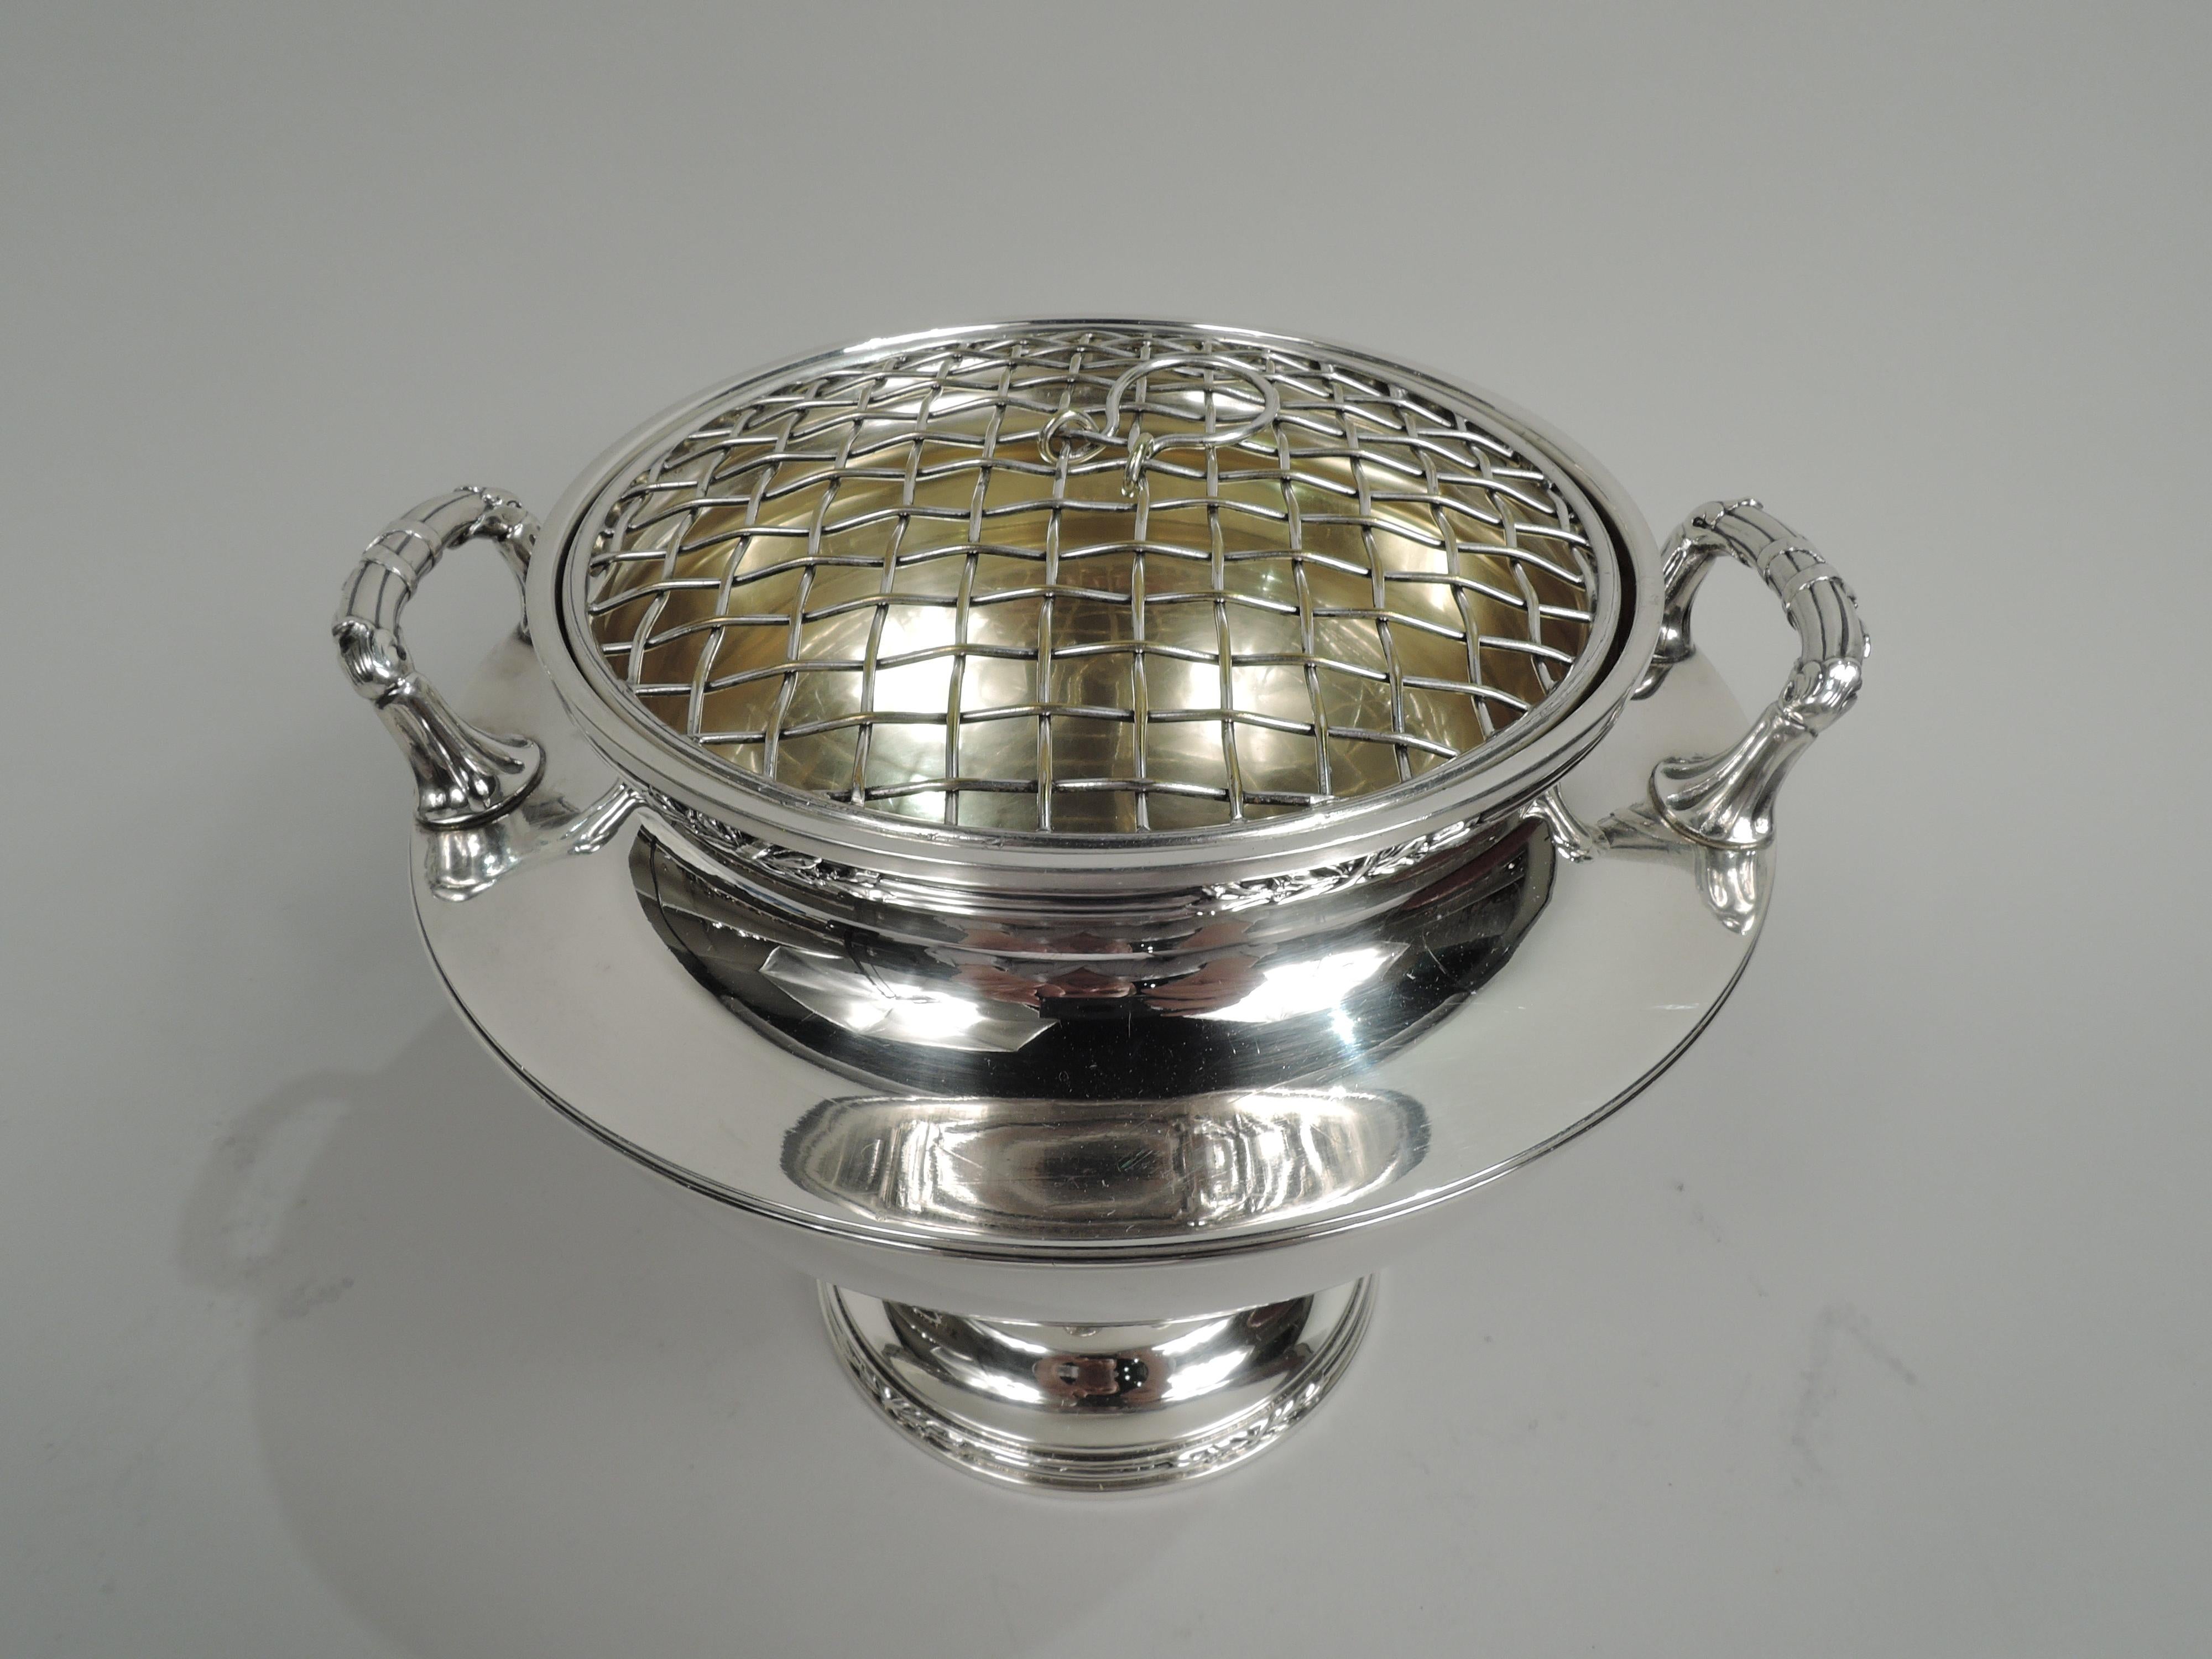 Edwardian Classical sterling silver vase. Made by Reed & Barton in Taunton, Mass. ca 1915. Round and tapering bowl with bracket side handles mounted to flat shoulder, and short and inset neck; raised and fluted foot. Reeding. Gilt-washed interior.